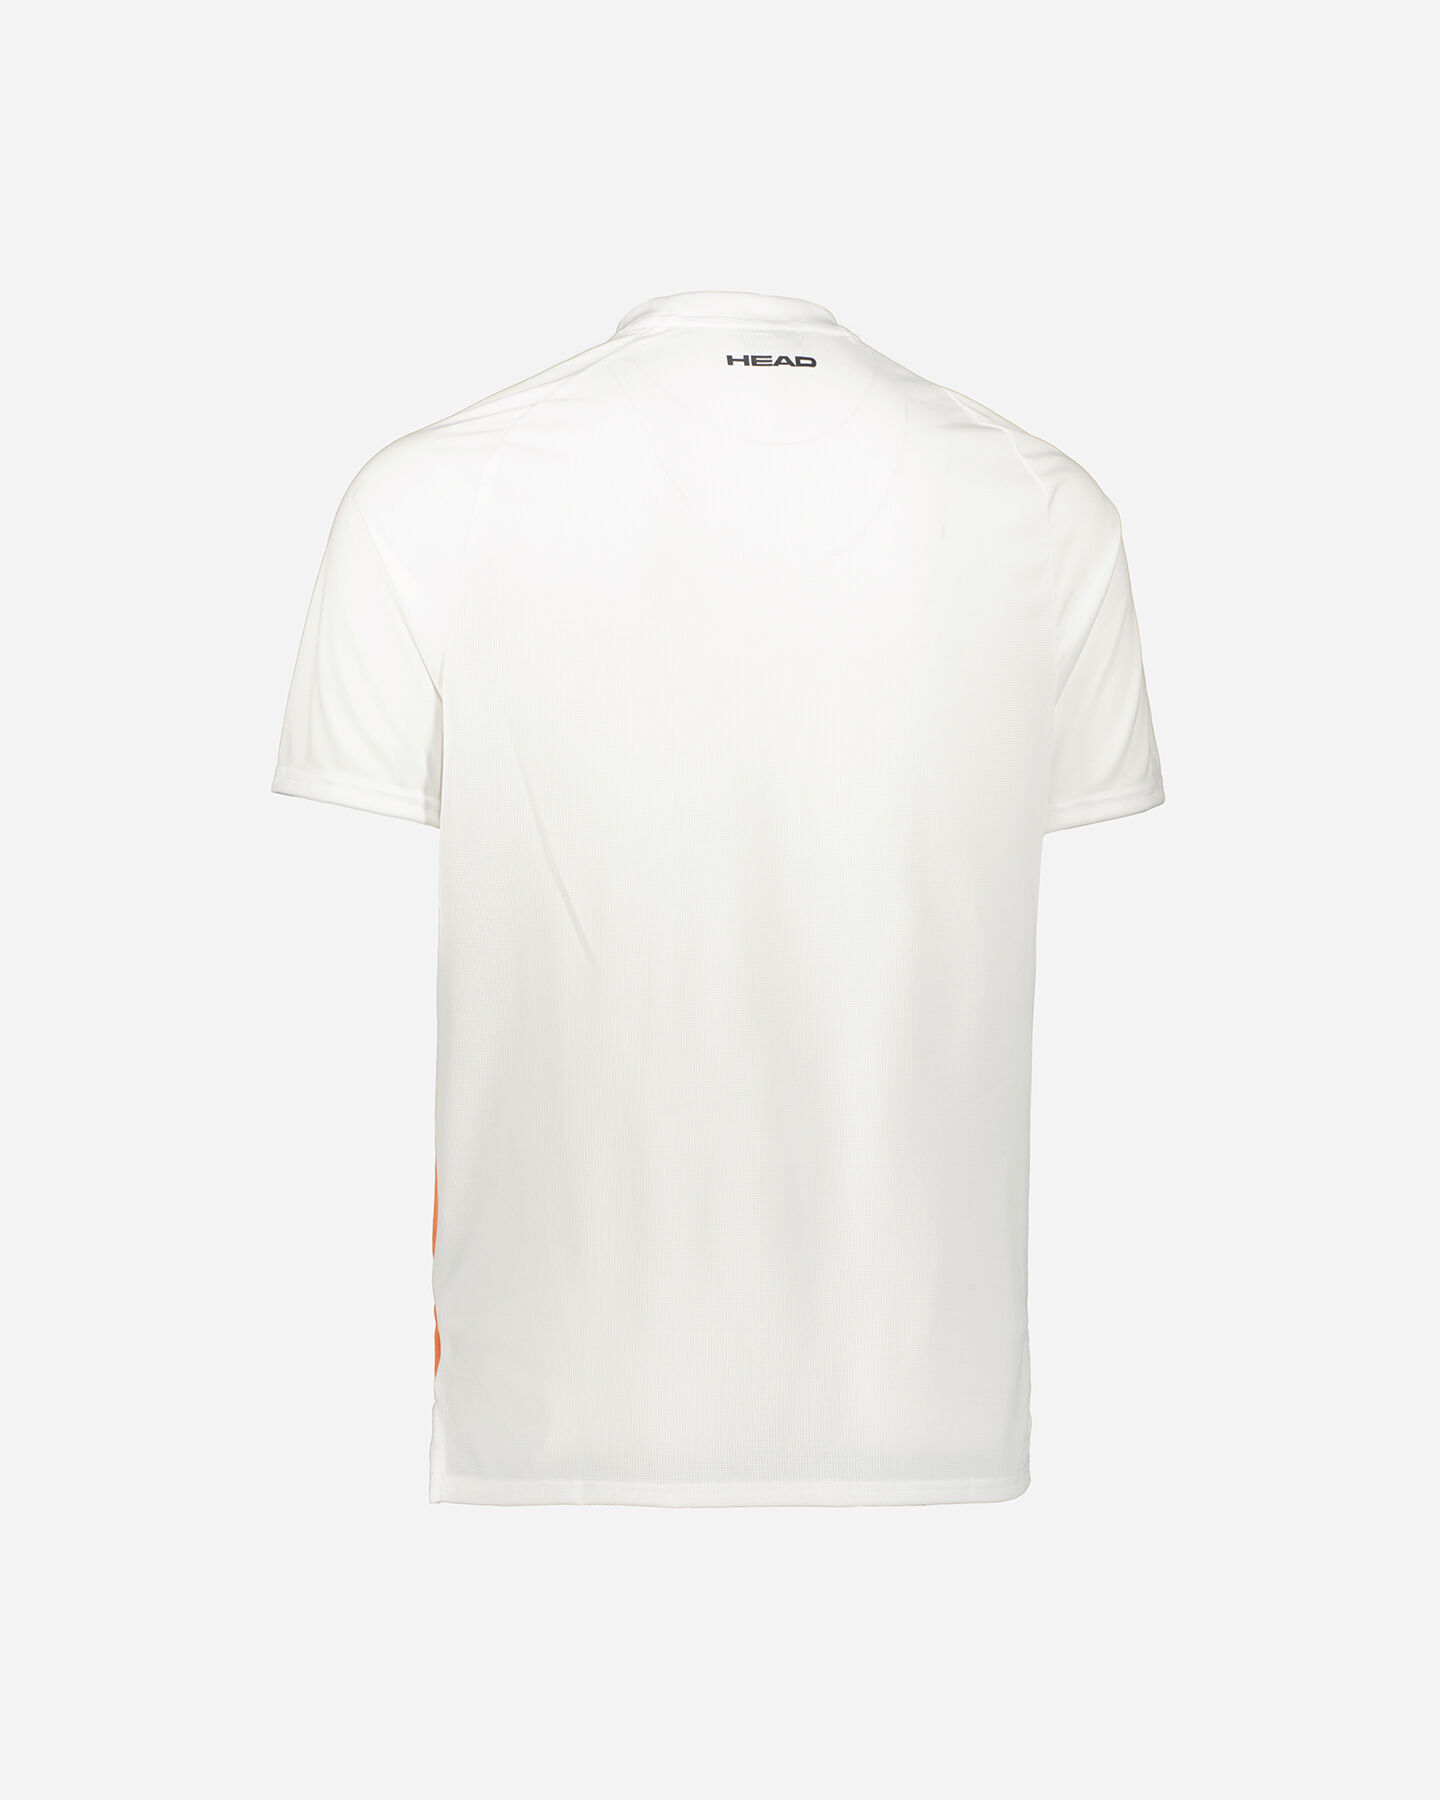  T-Shirt tennis HEAD TOPSPIN M S5607132|FAXV|S scatto 1